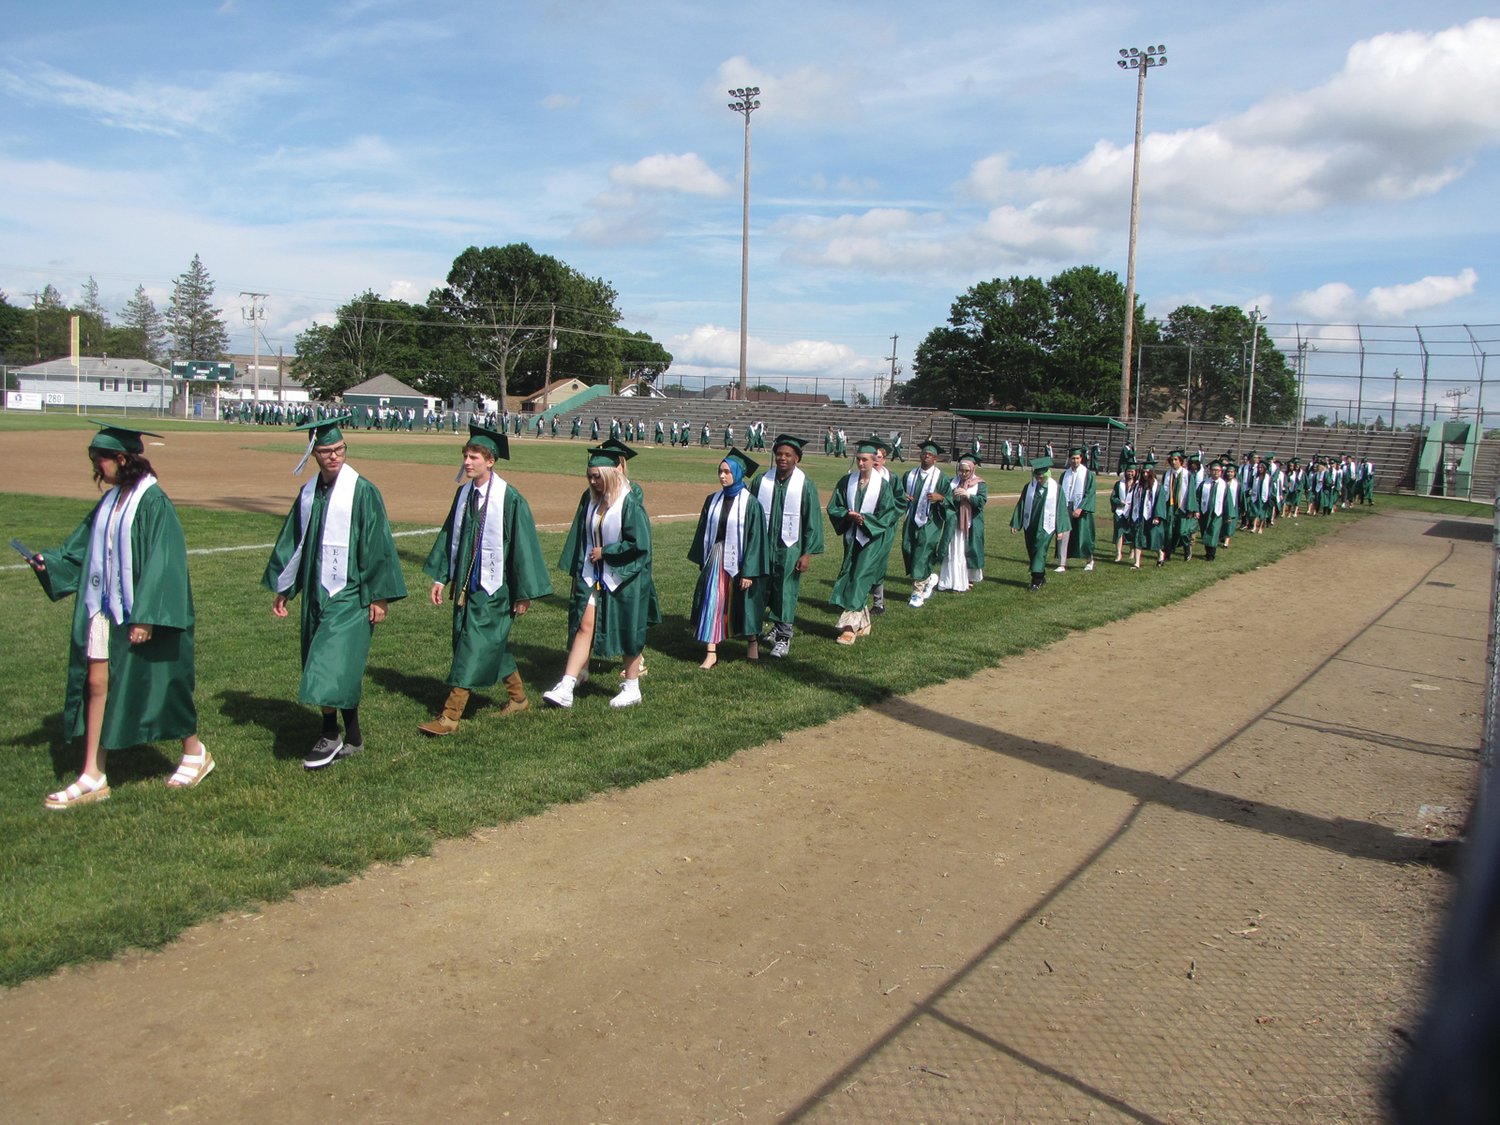 READY TO GO: Before the start of Saturday’s graduation ceremony at Cranston Stadium, the members of Cranston East’s class of 2021 lined up along the edge of the baseball field.